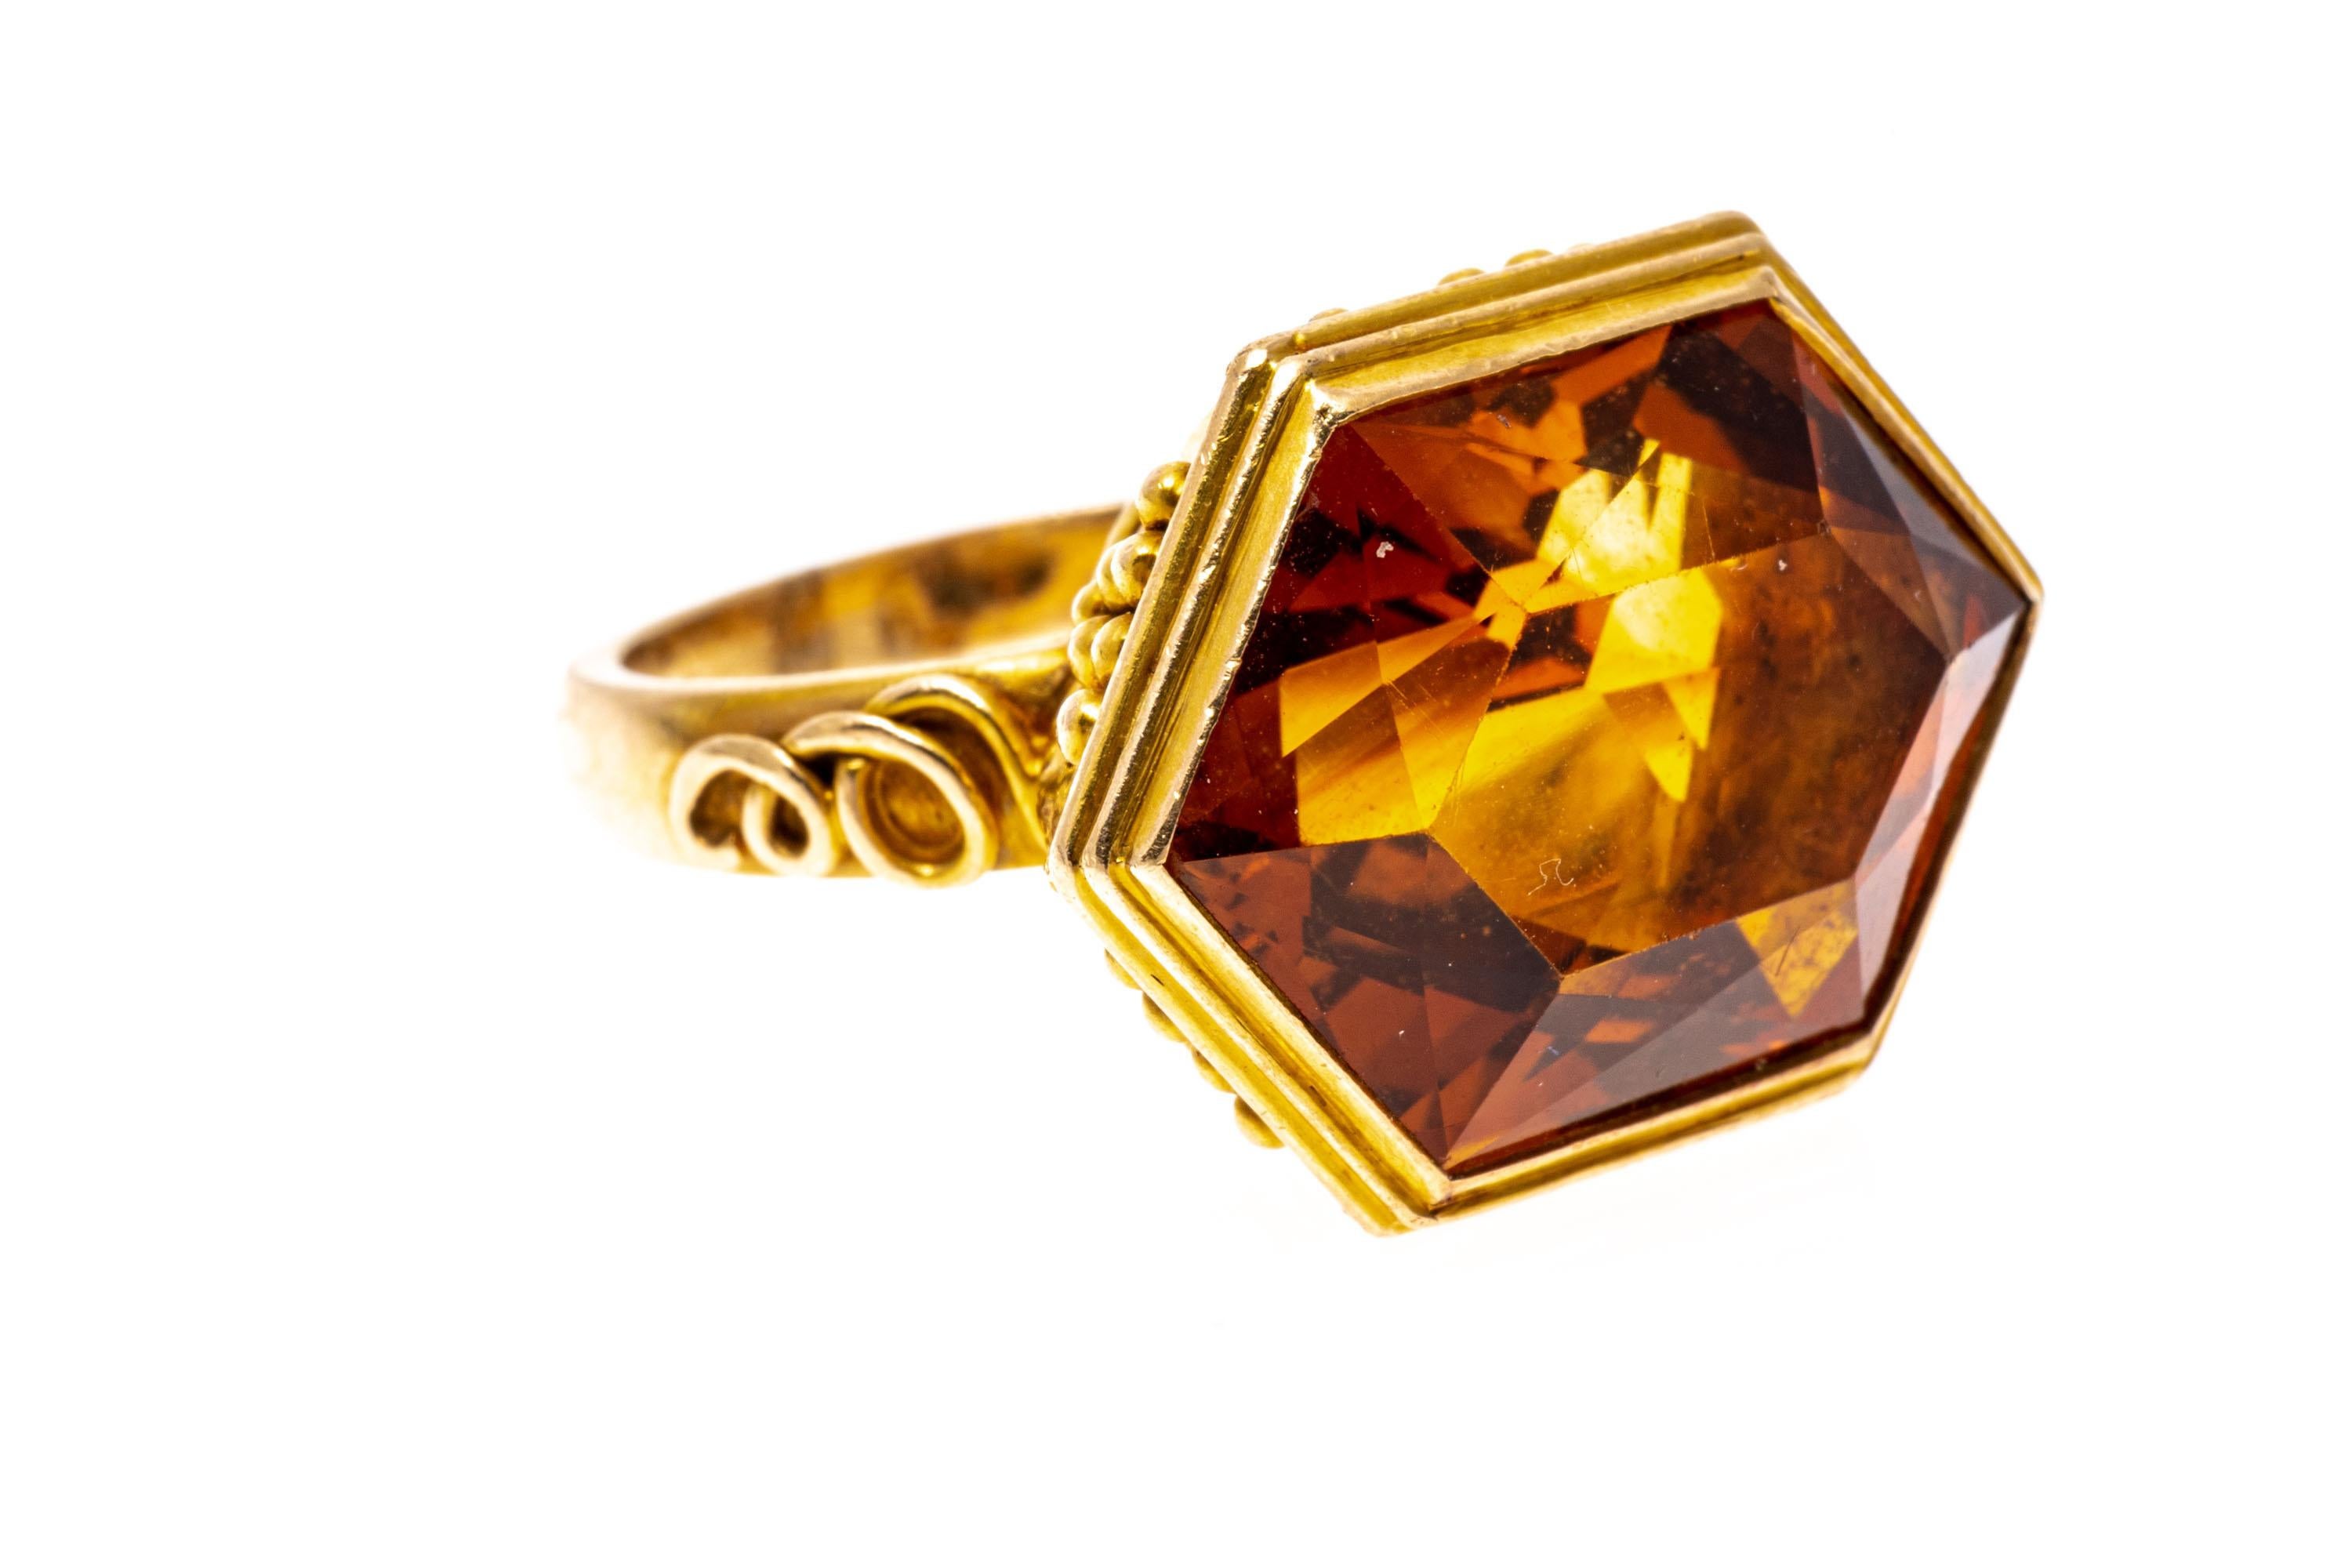 12k Yellow Gold Hexagonal Orange Citrine, Grape And Vine Motif Ring, Size 6.75 In Good Condition For Sale In Southport, CT